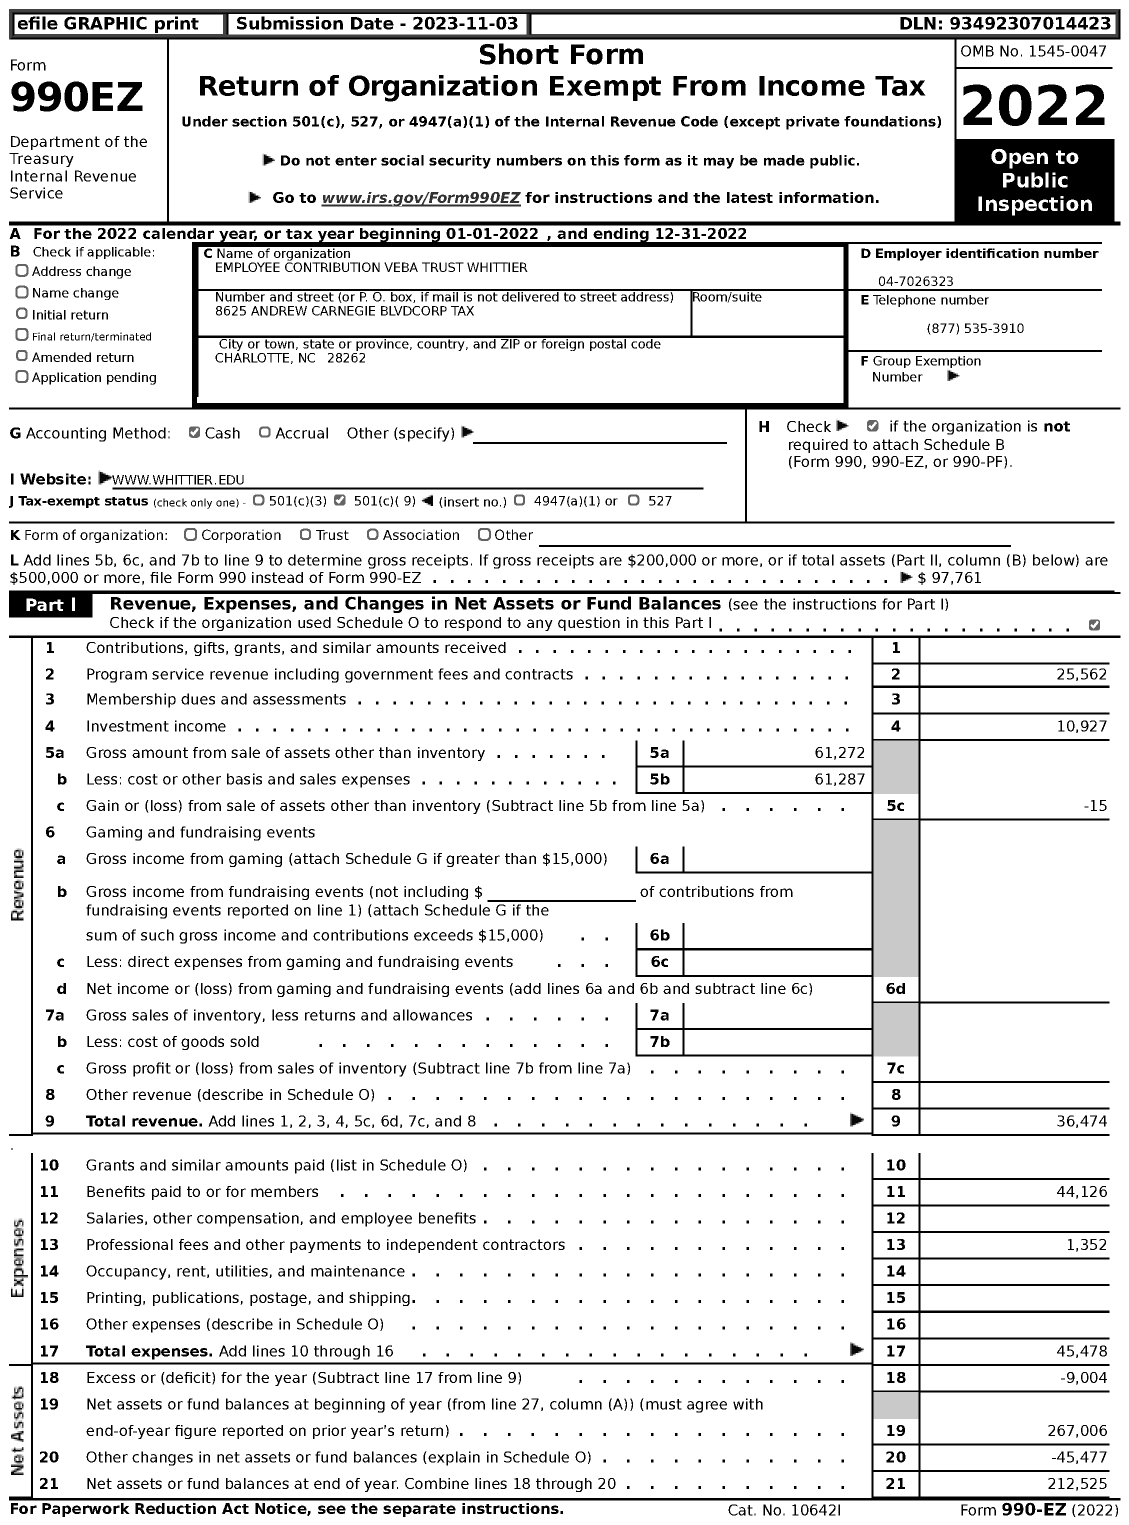 Image of first page of 2022 Form 990EZ for Employee Contribution Veba Trust Whittier